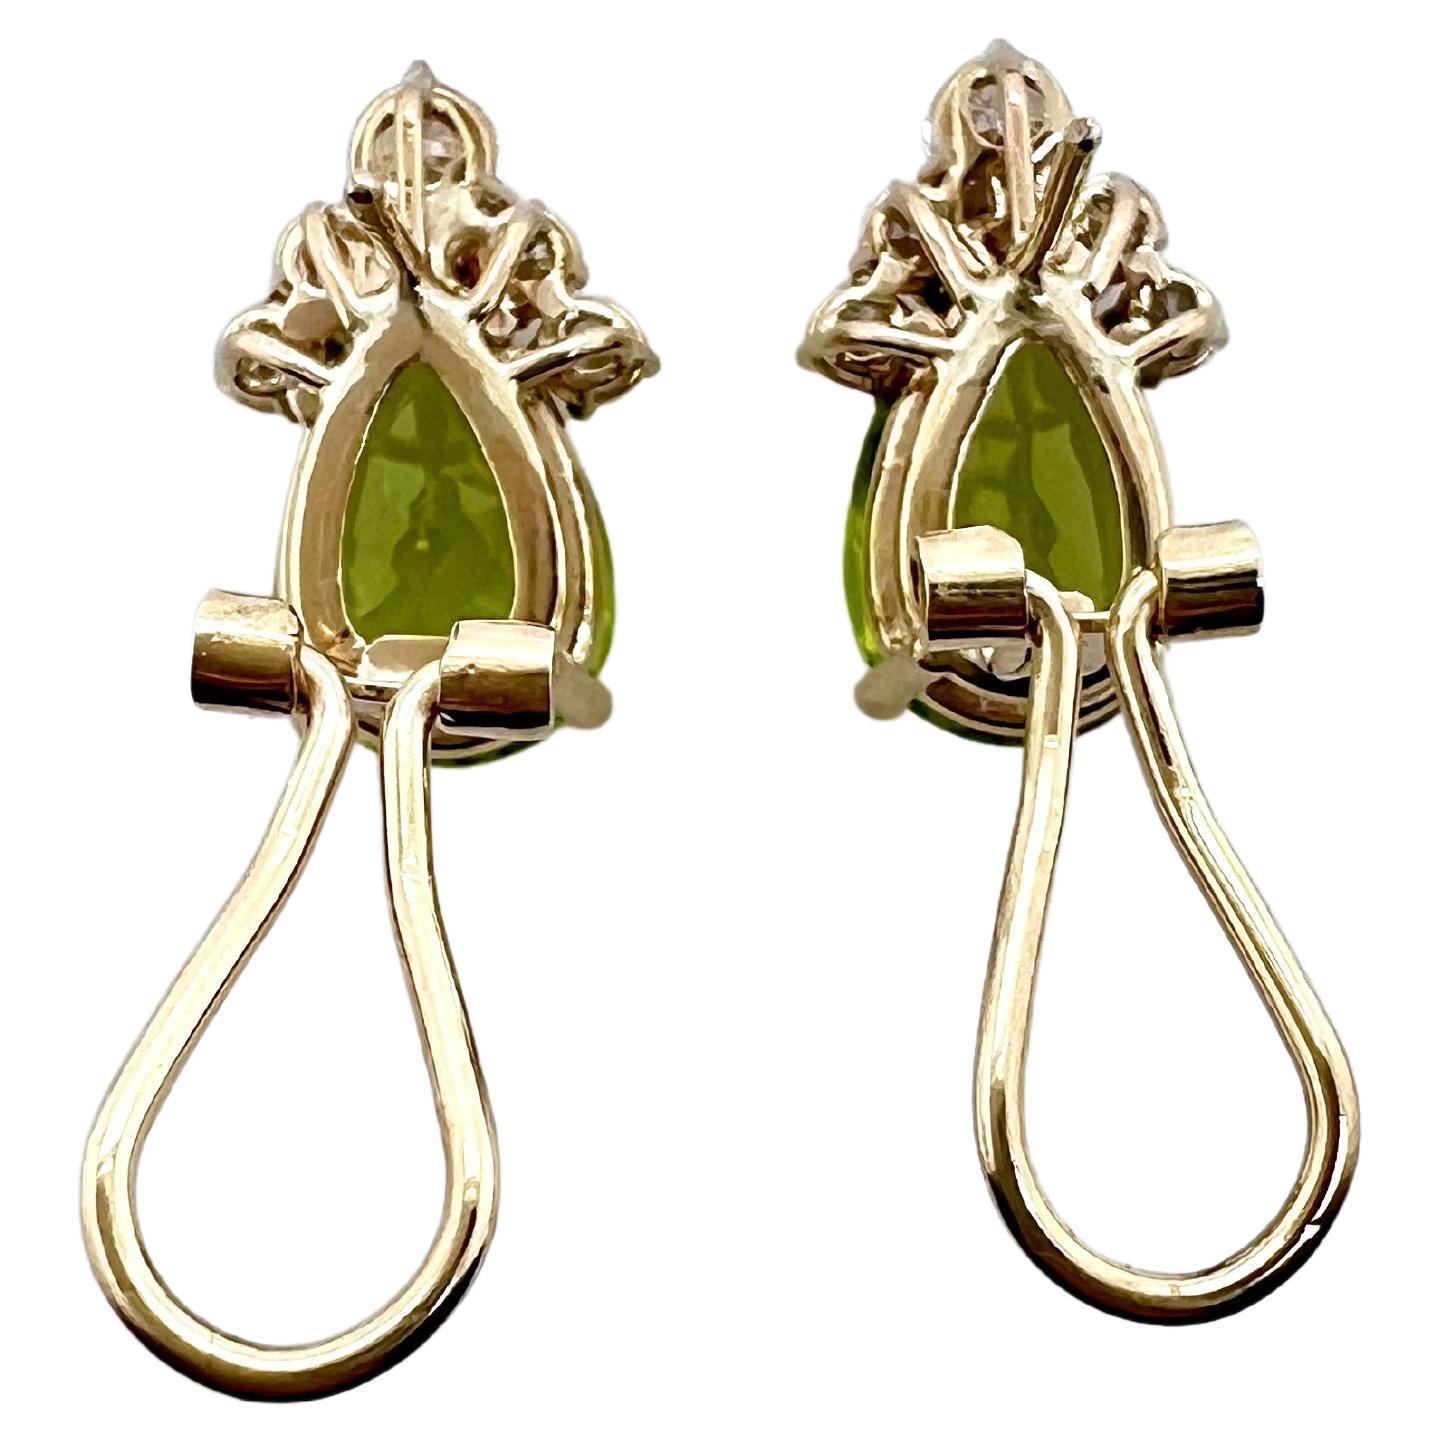 These beautiful, pear shaped peridot earrings are tastefully done.  The top apex are lined with round diamonds and
have a french clip backing.  The beautiful lime green color has a vibrant pop and will stand out nicely on the ears.  Its
the perfect